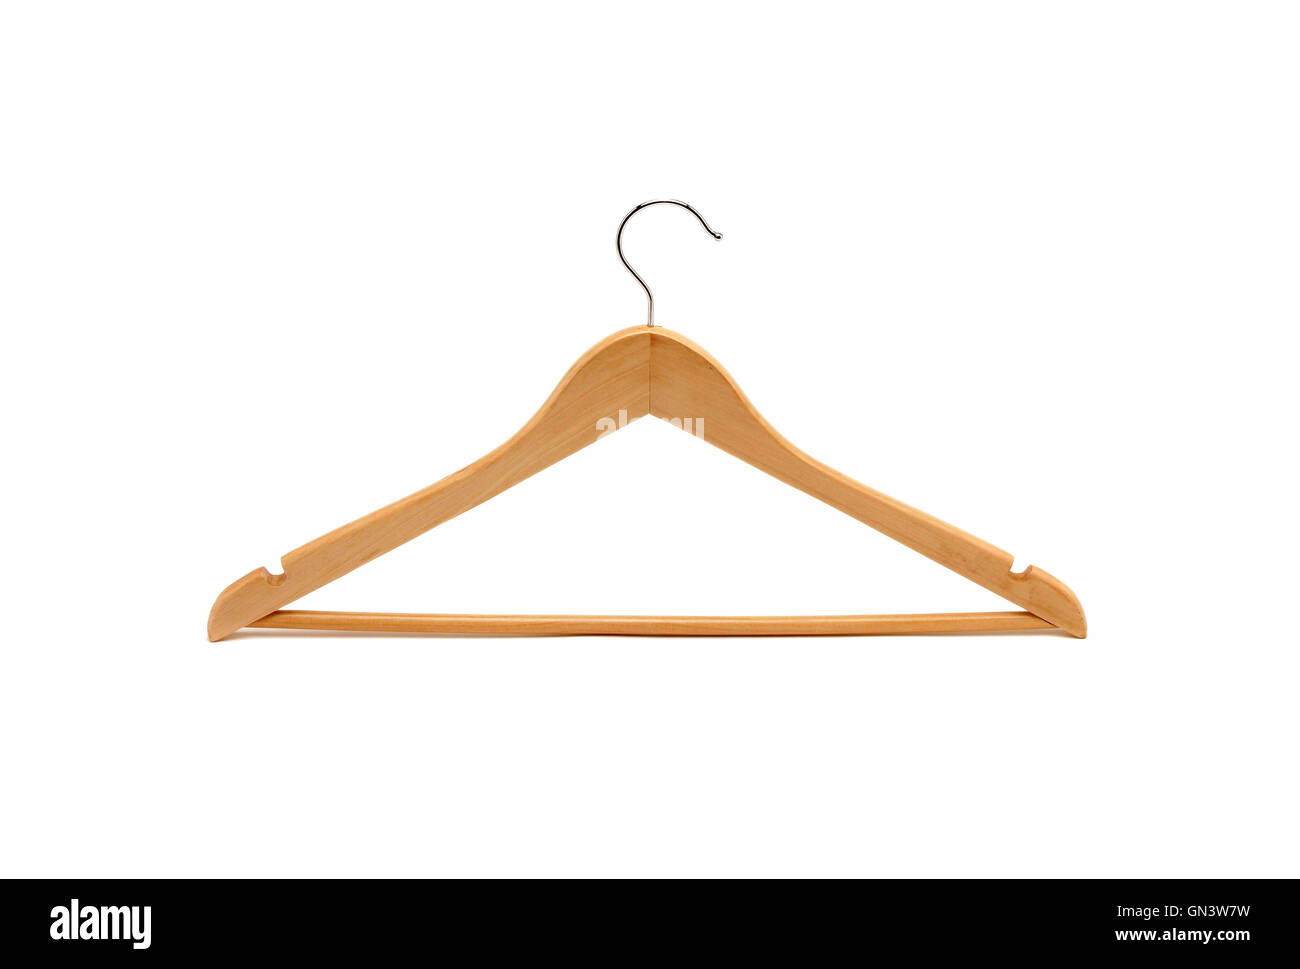 Wooden hanger, it is isolated on a white background Stock Photo